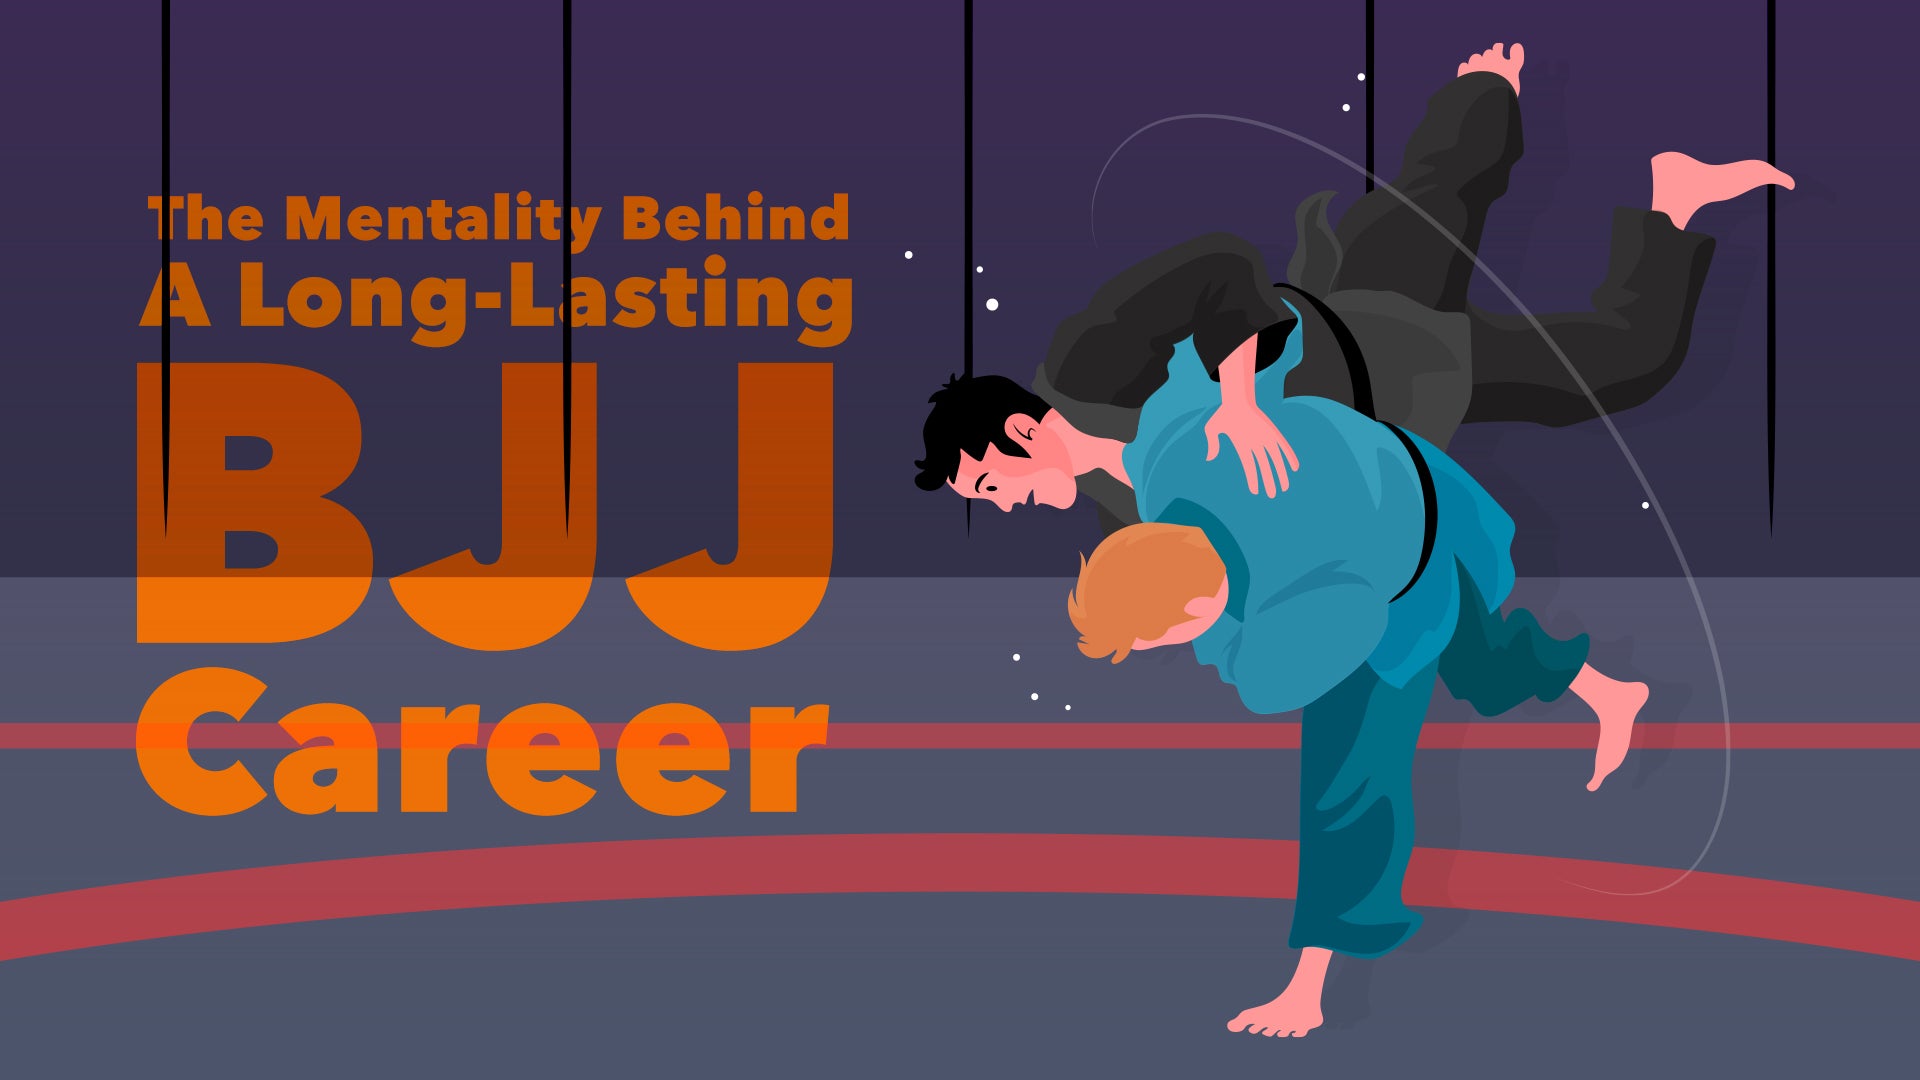 The Mentality Behind A Long-Lasting BJJ Career